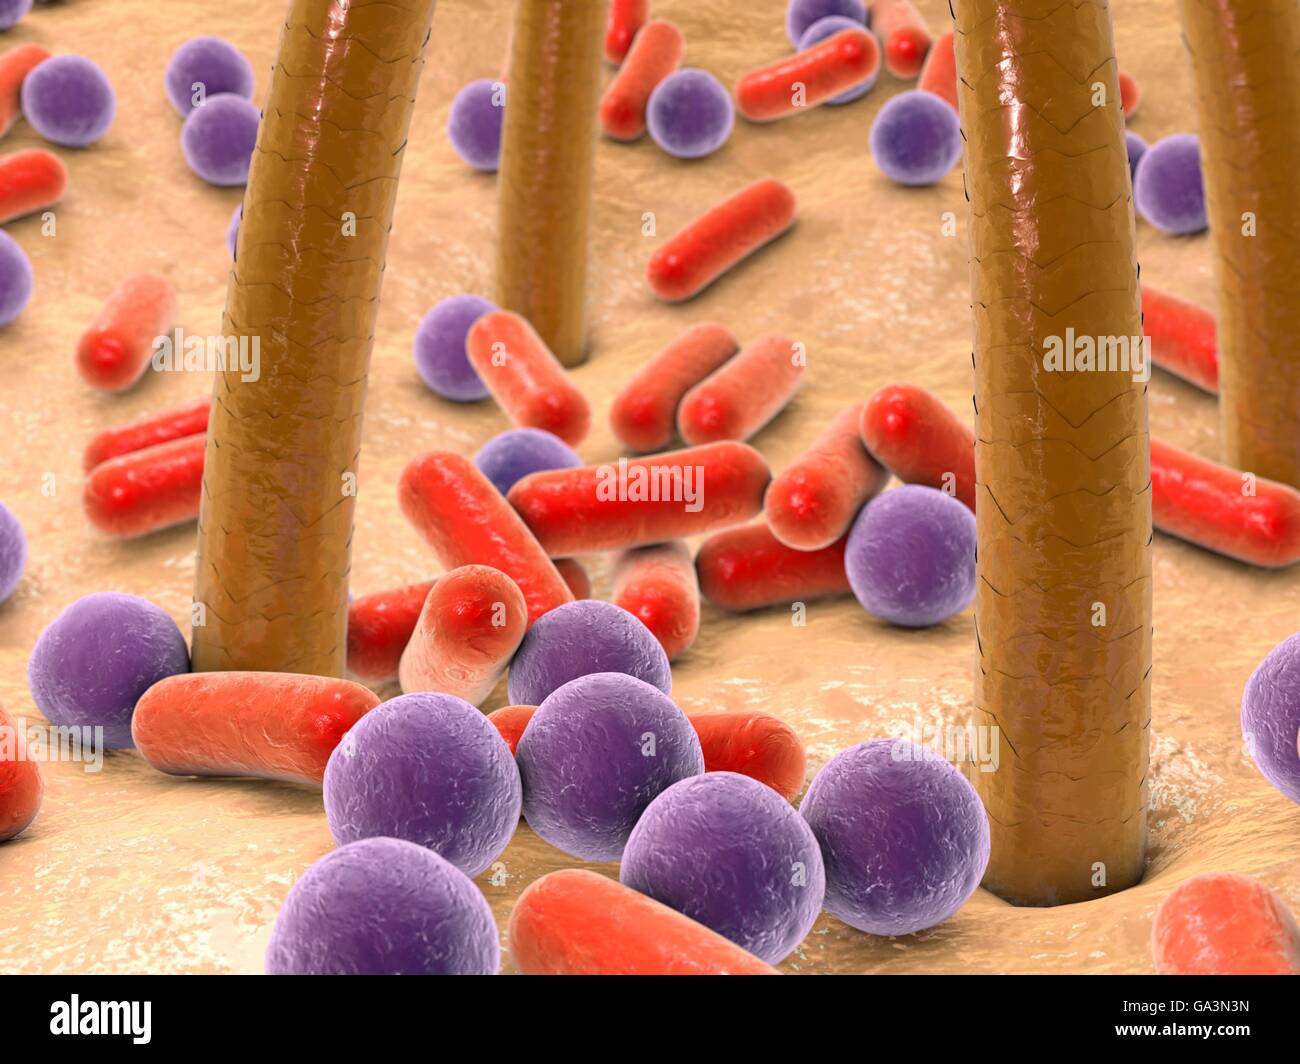 Bacteria on skin with hairs. Computer artwork of bacteria (purple and red) on human skin. Many types of bacteria are found on human skin, especially associated with sweat glands and hair follicles. They usually cause no problems, although some can cause acne. Bacteria usually only become a problem if they penetrate the skin, for example through a wound or cut. Stock Photo